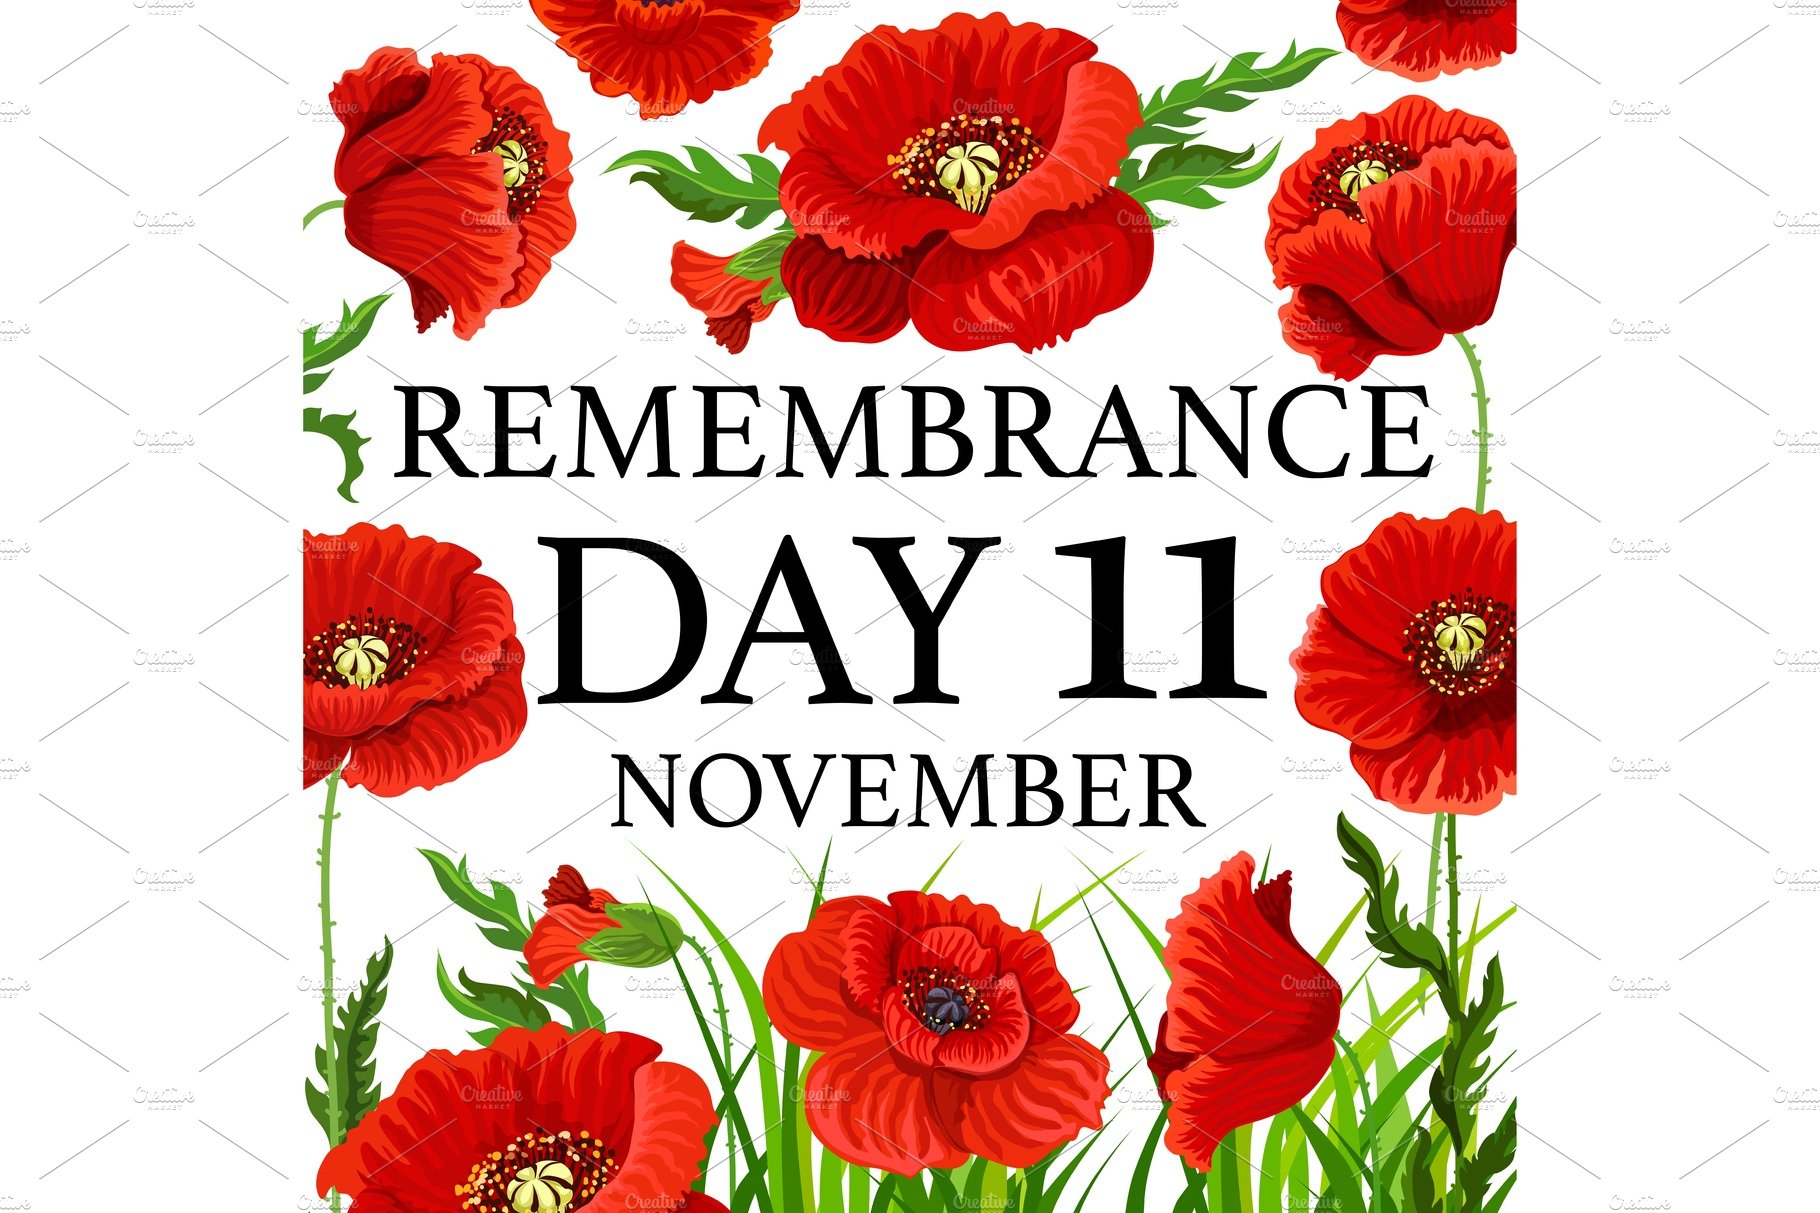 11 November poppy remembrance day vector card cover image.